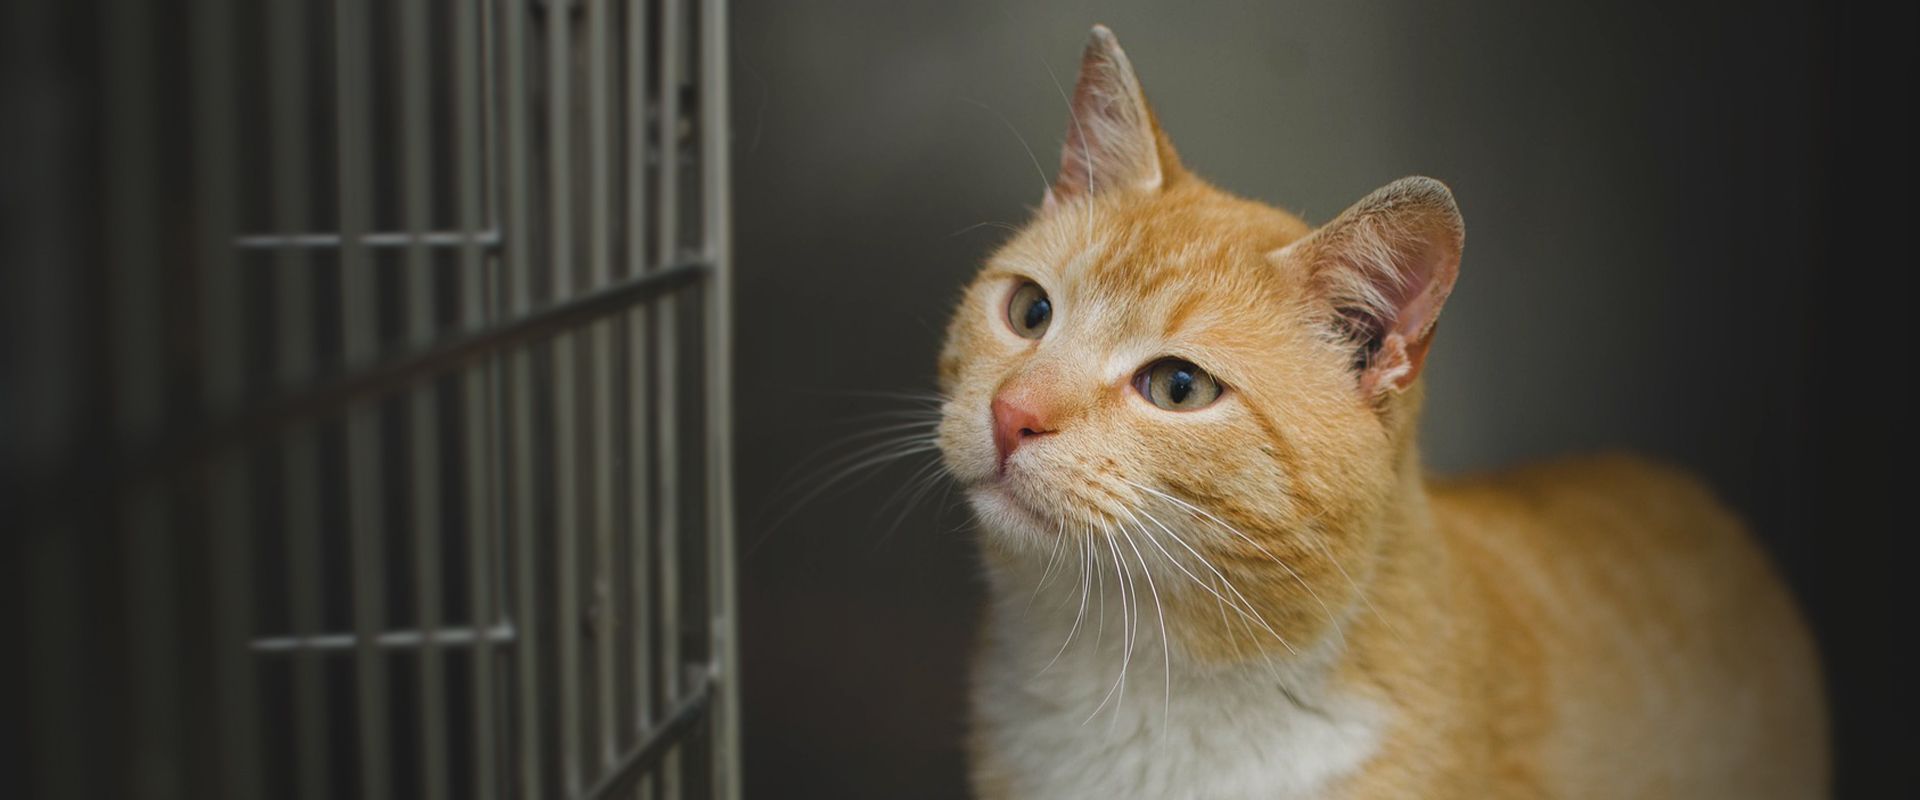 orange cat in a cage at a veterinary clinic